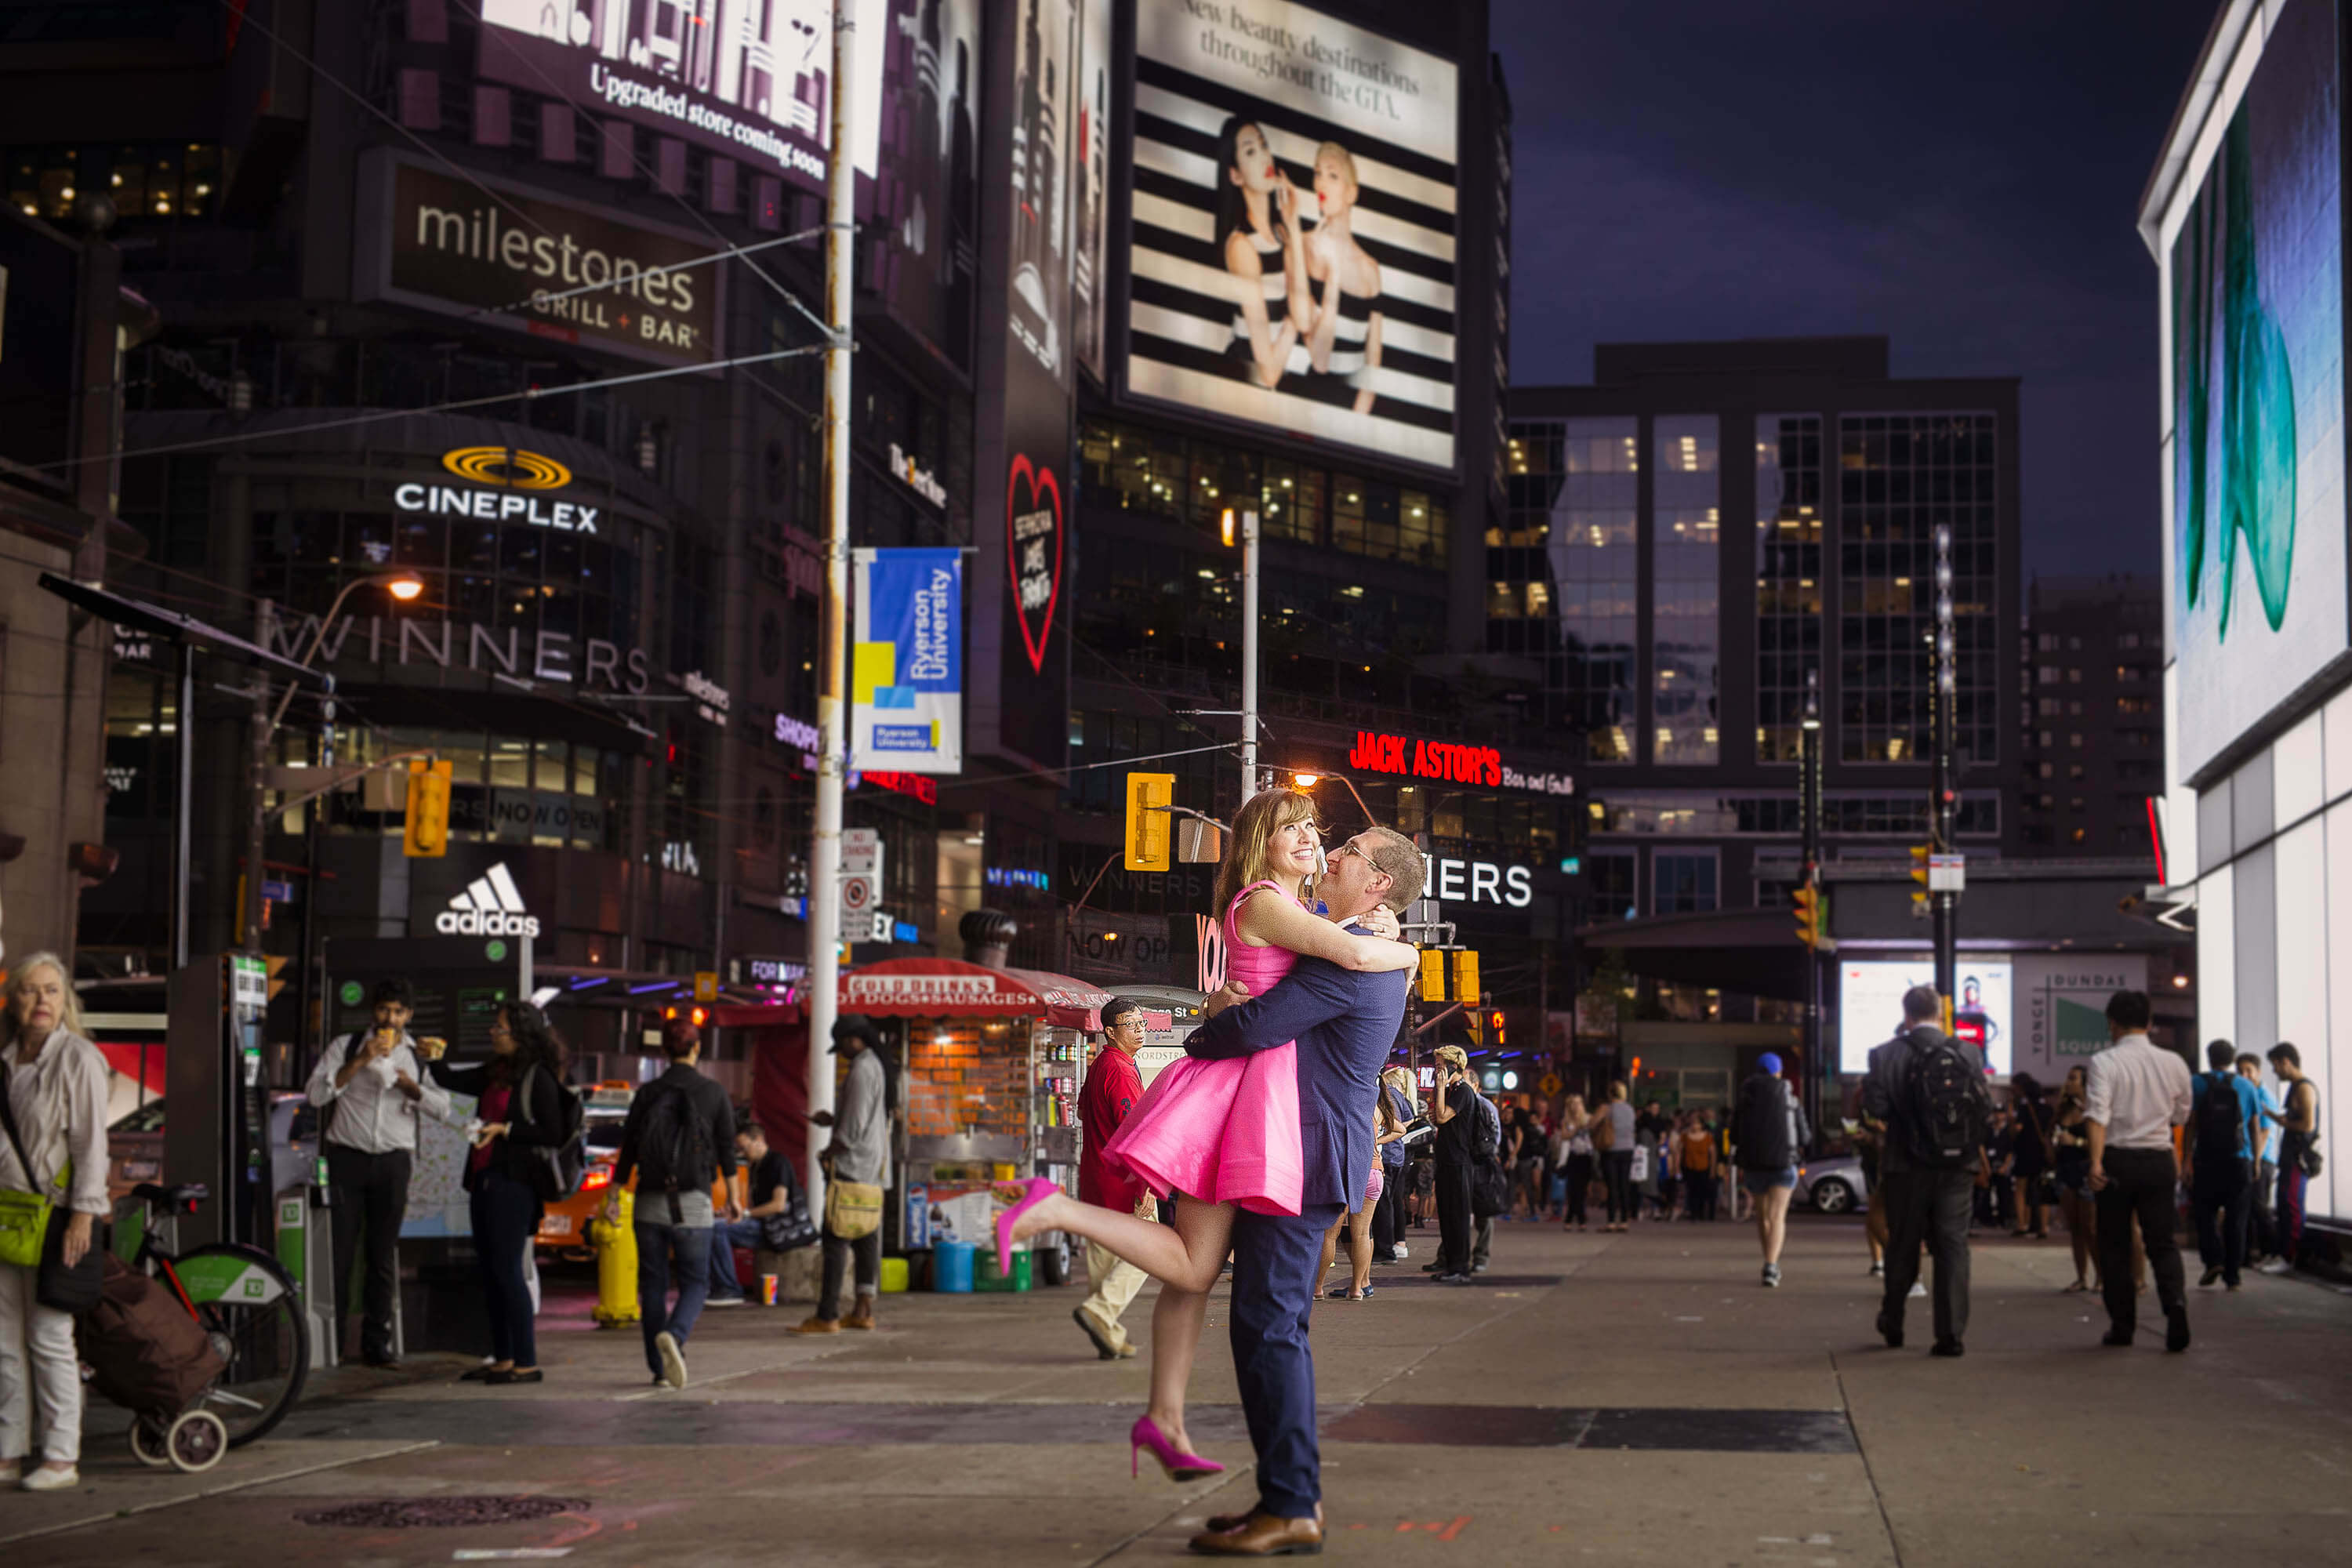 Toronto's Dundas Square engagement session with male holding his fiancé in the air